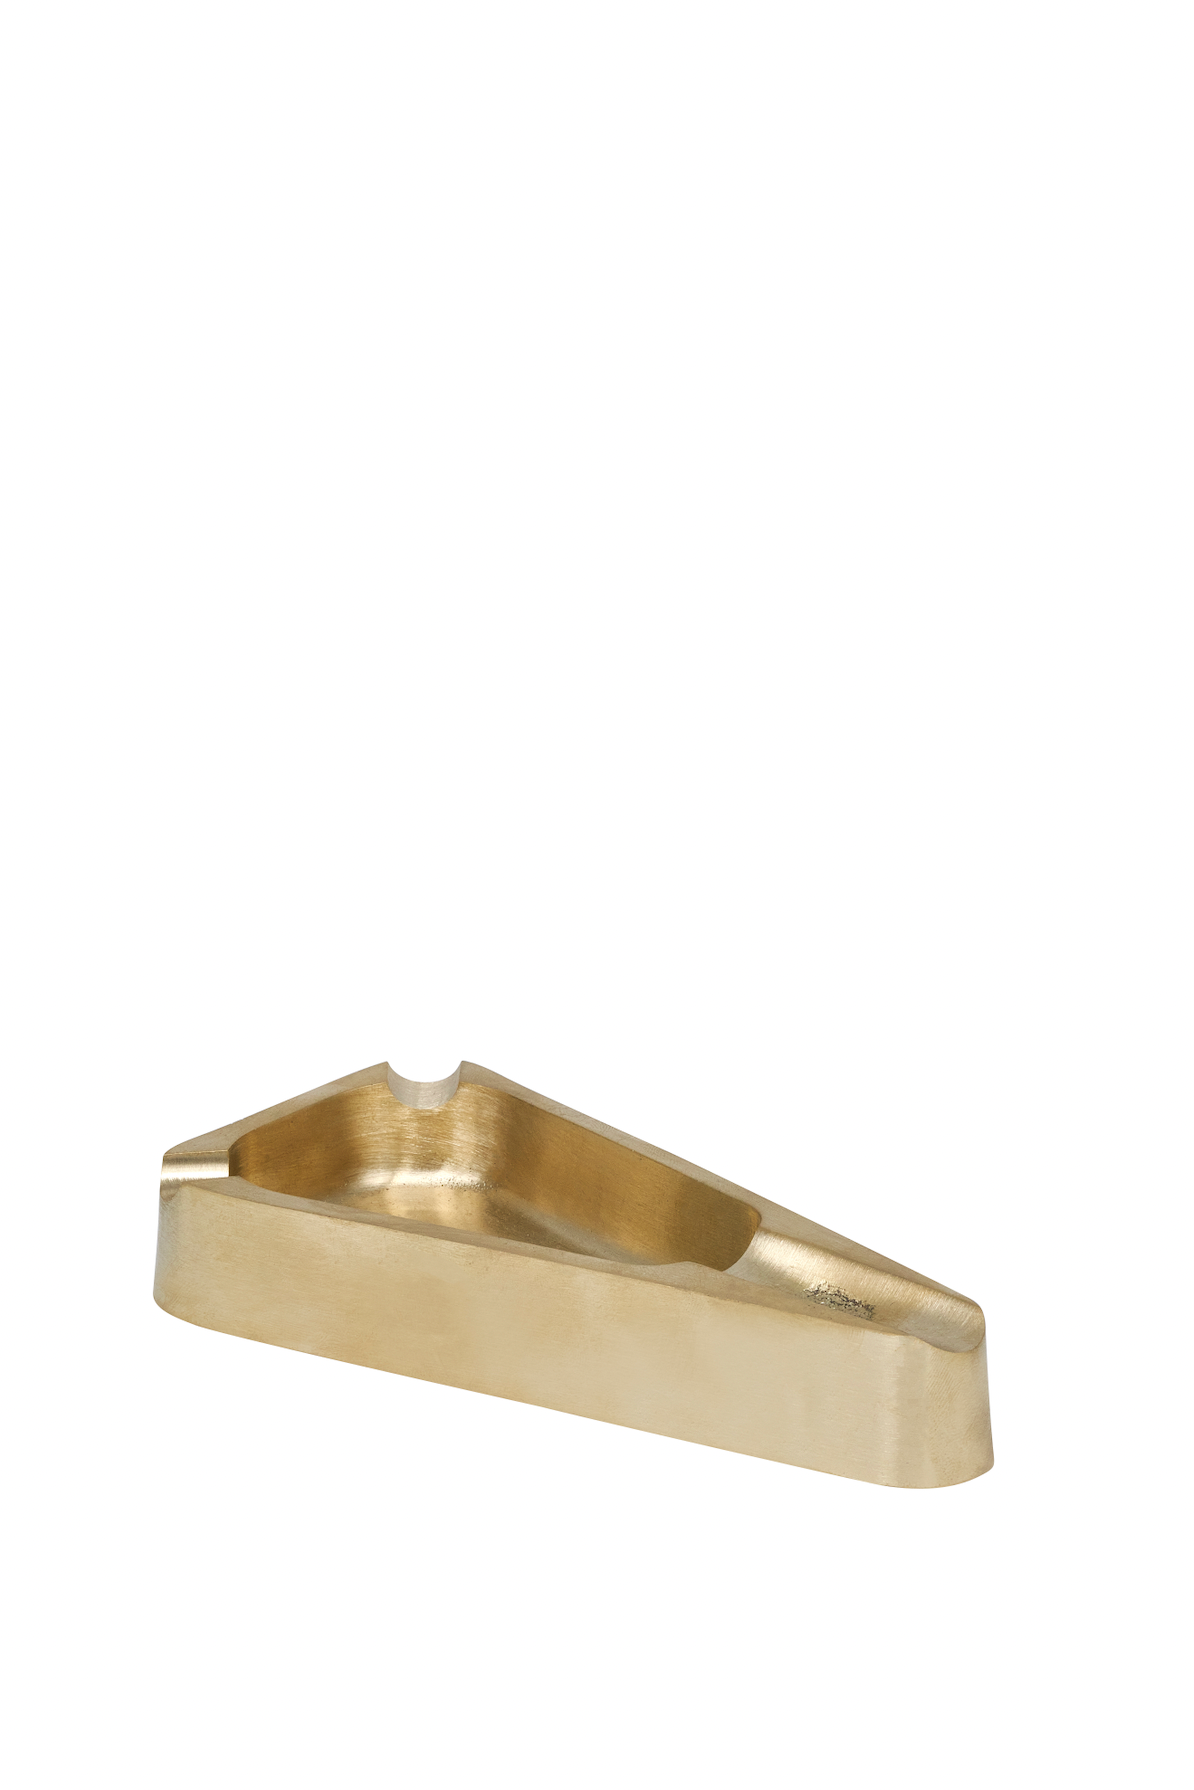 Triangle Brass Ashtray with a Golden Touch